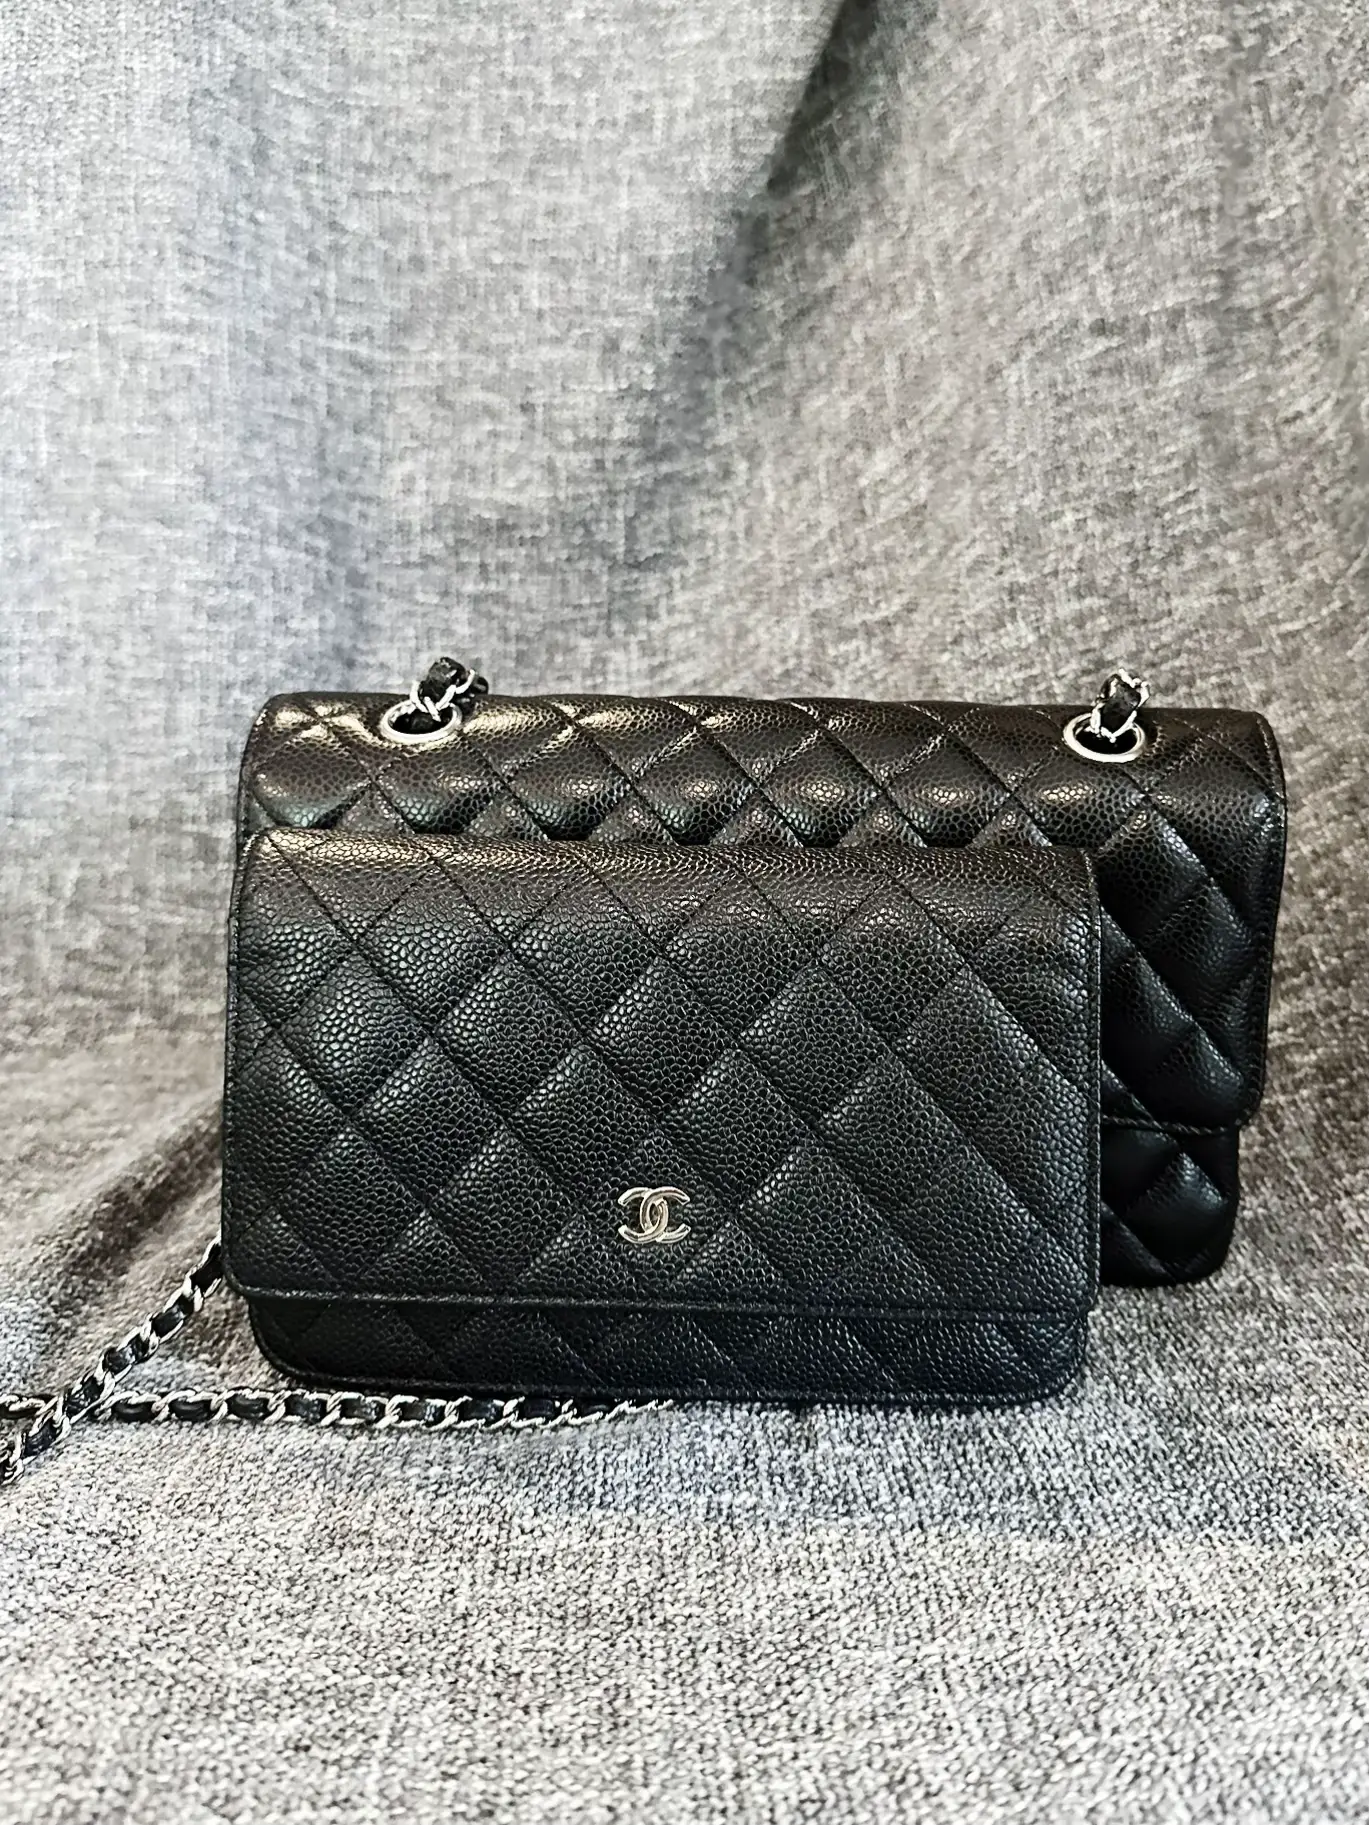 Compared Classic 10 Top Chanel Version vs Wallet on Chain🖤✨, Gallery  posted by nibnalib